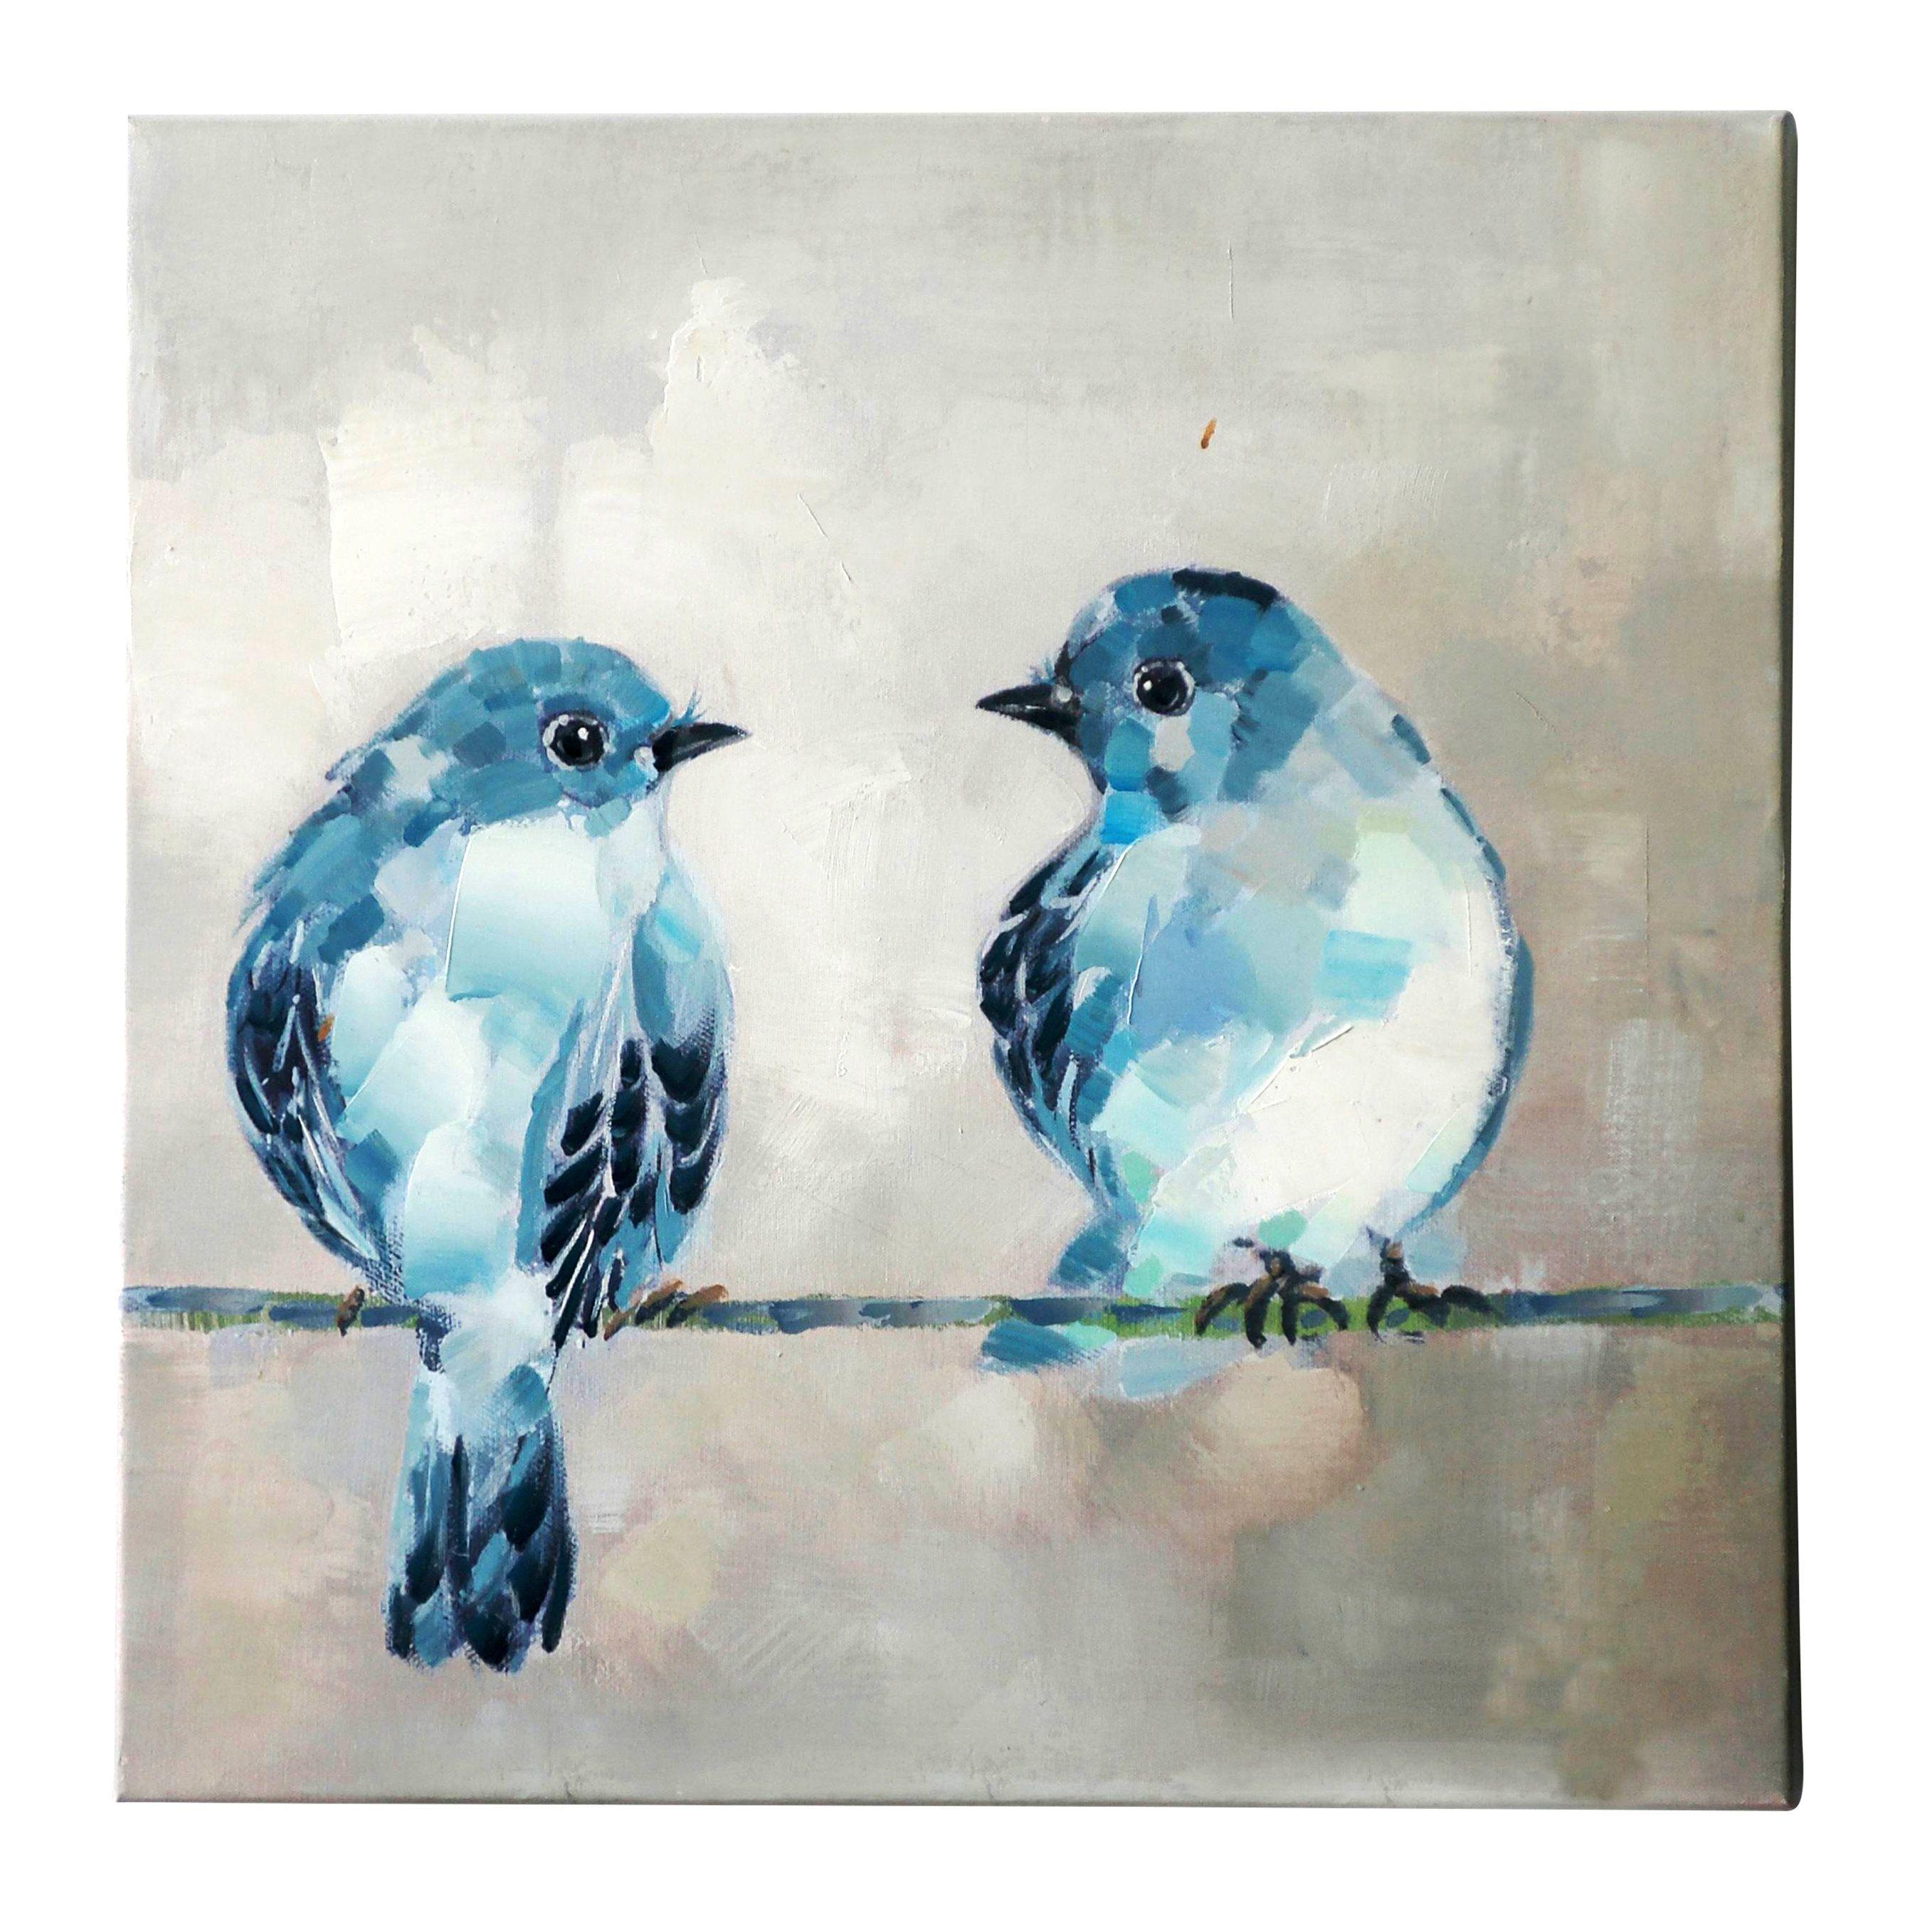 Two Blue Bird Logo - Jeco Inc. 'Two Birds' Painting Print on Canvas & Reviews | Wayfair